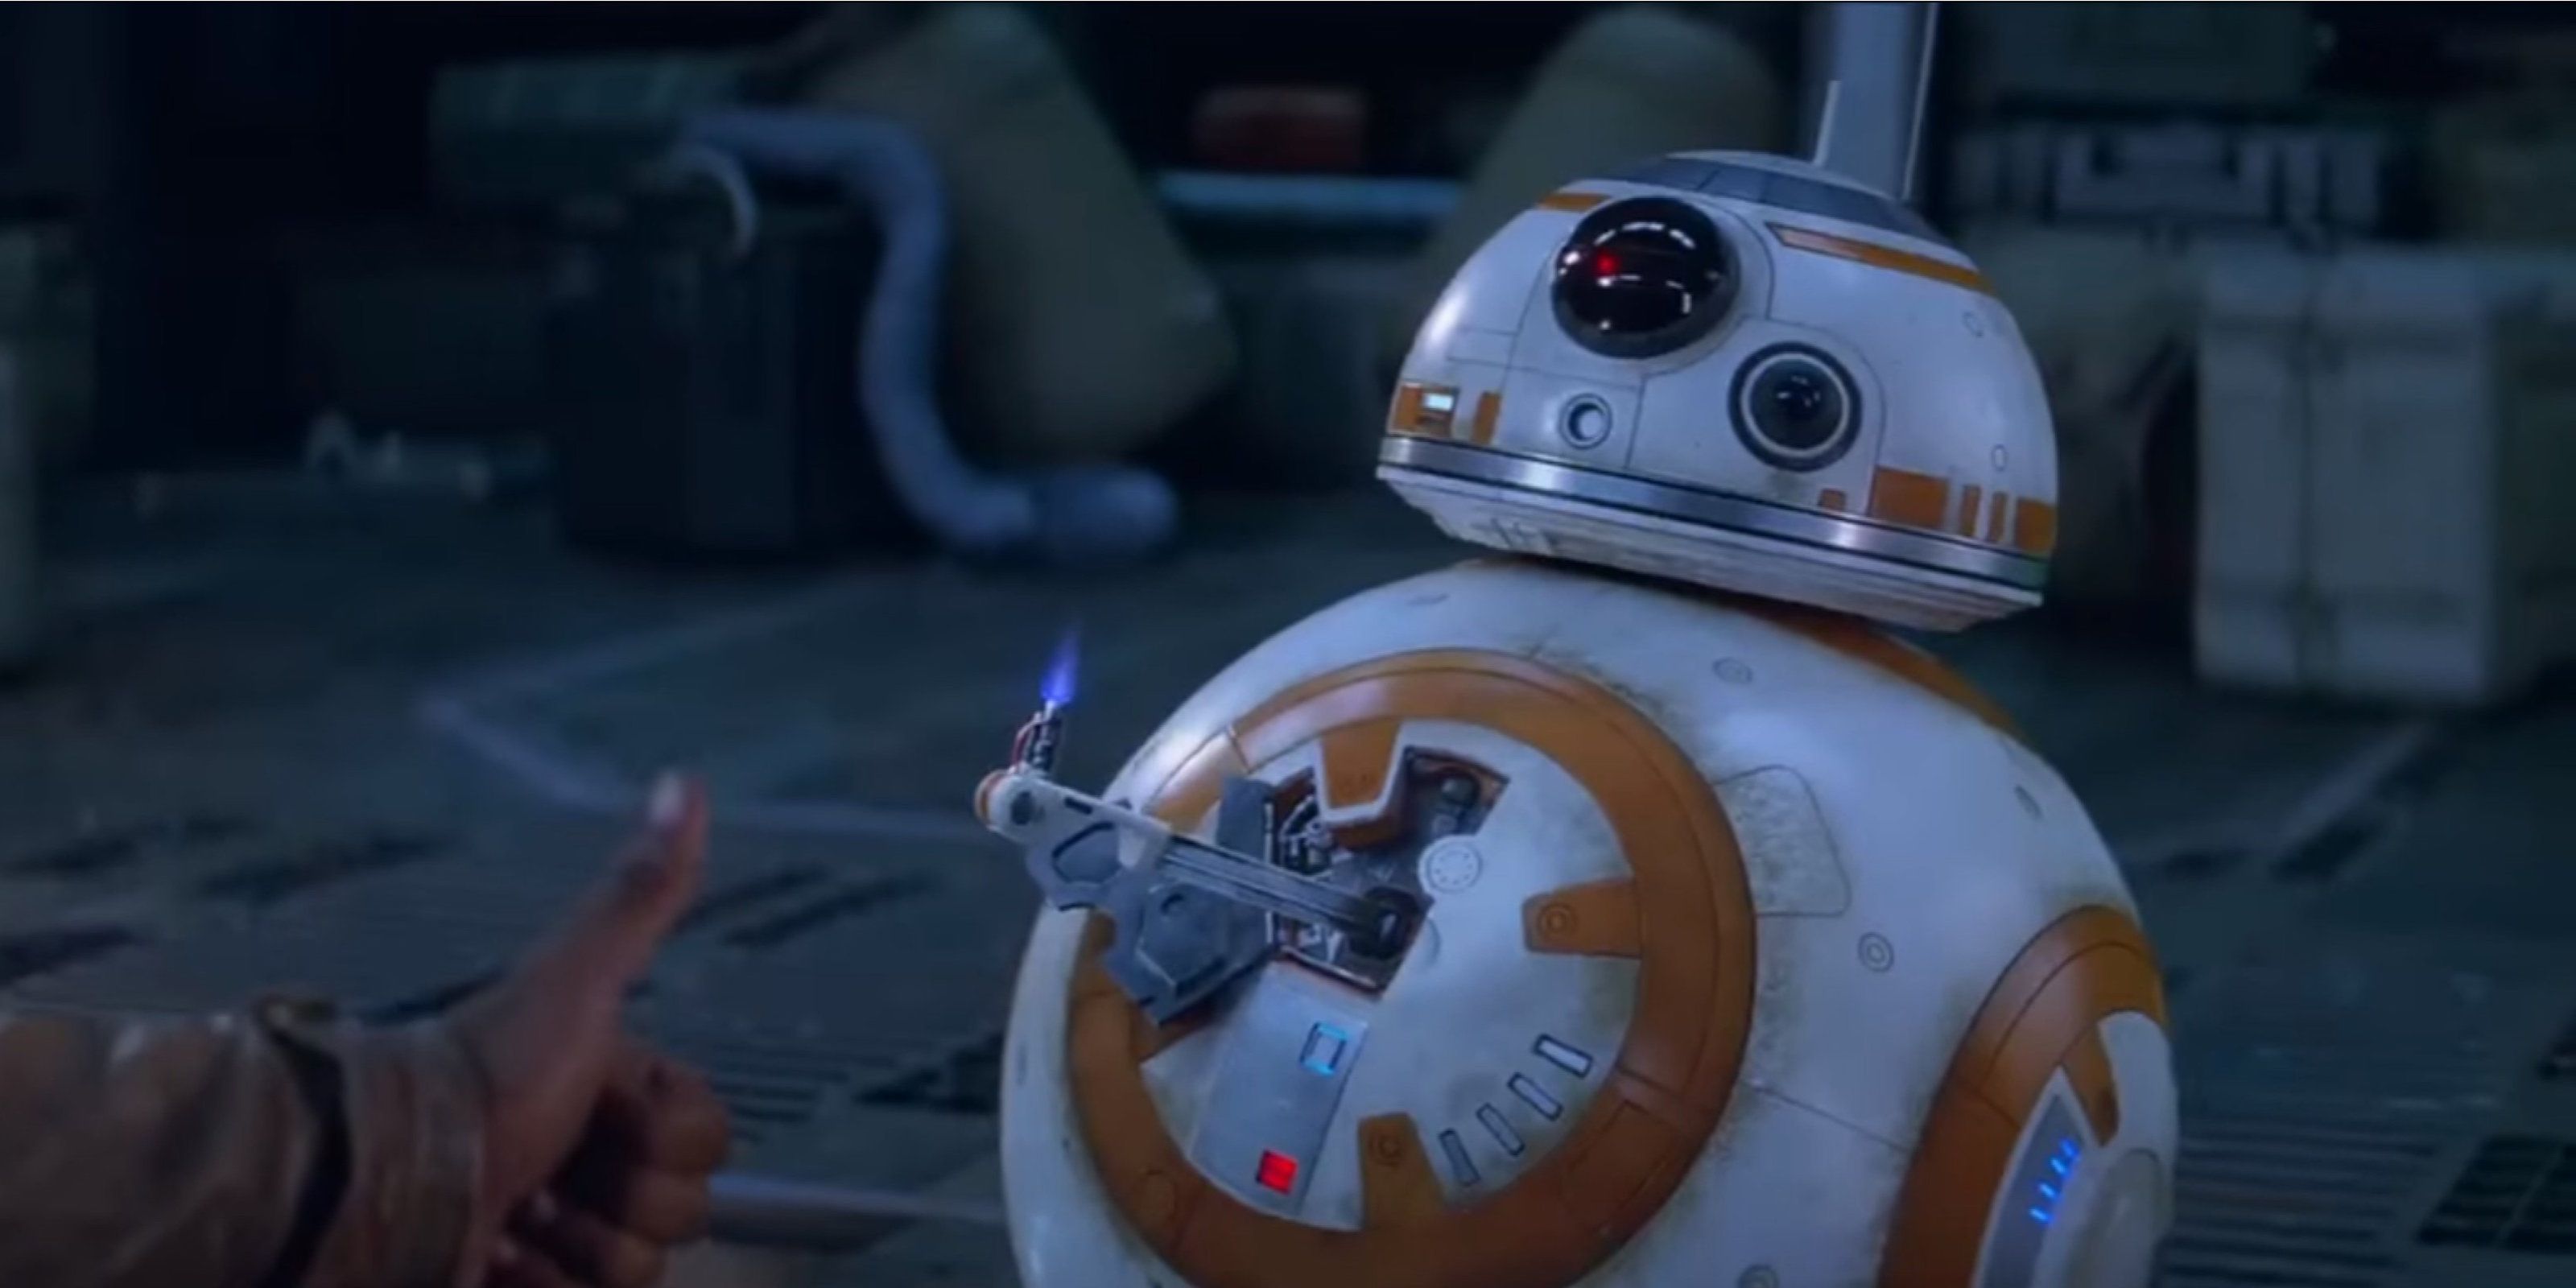 BB-8 Gives a thumbs up to Finn in The Force Awakens